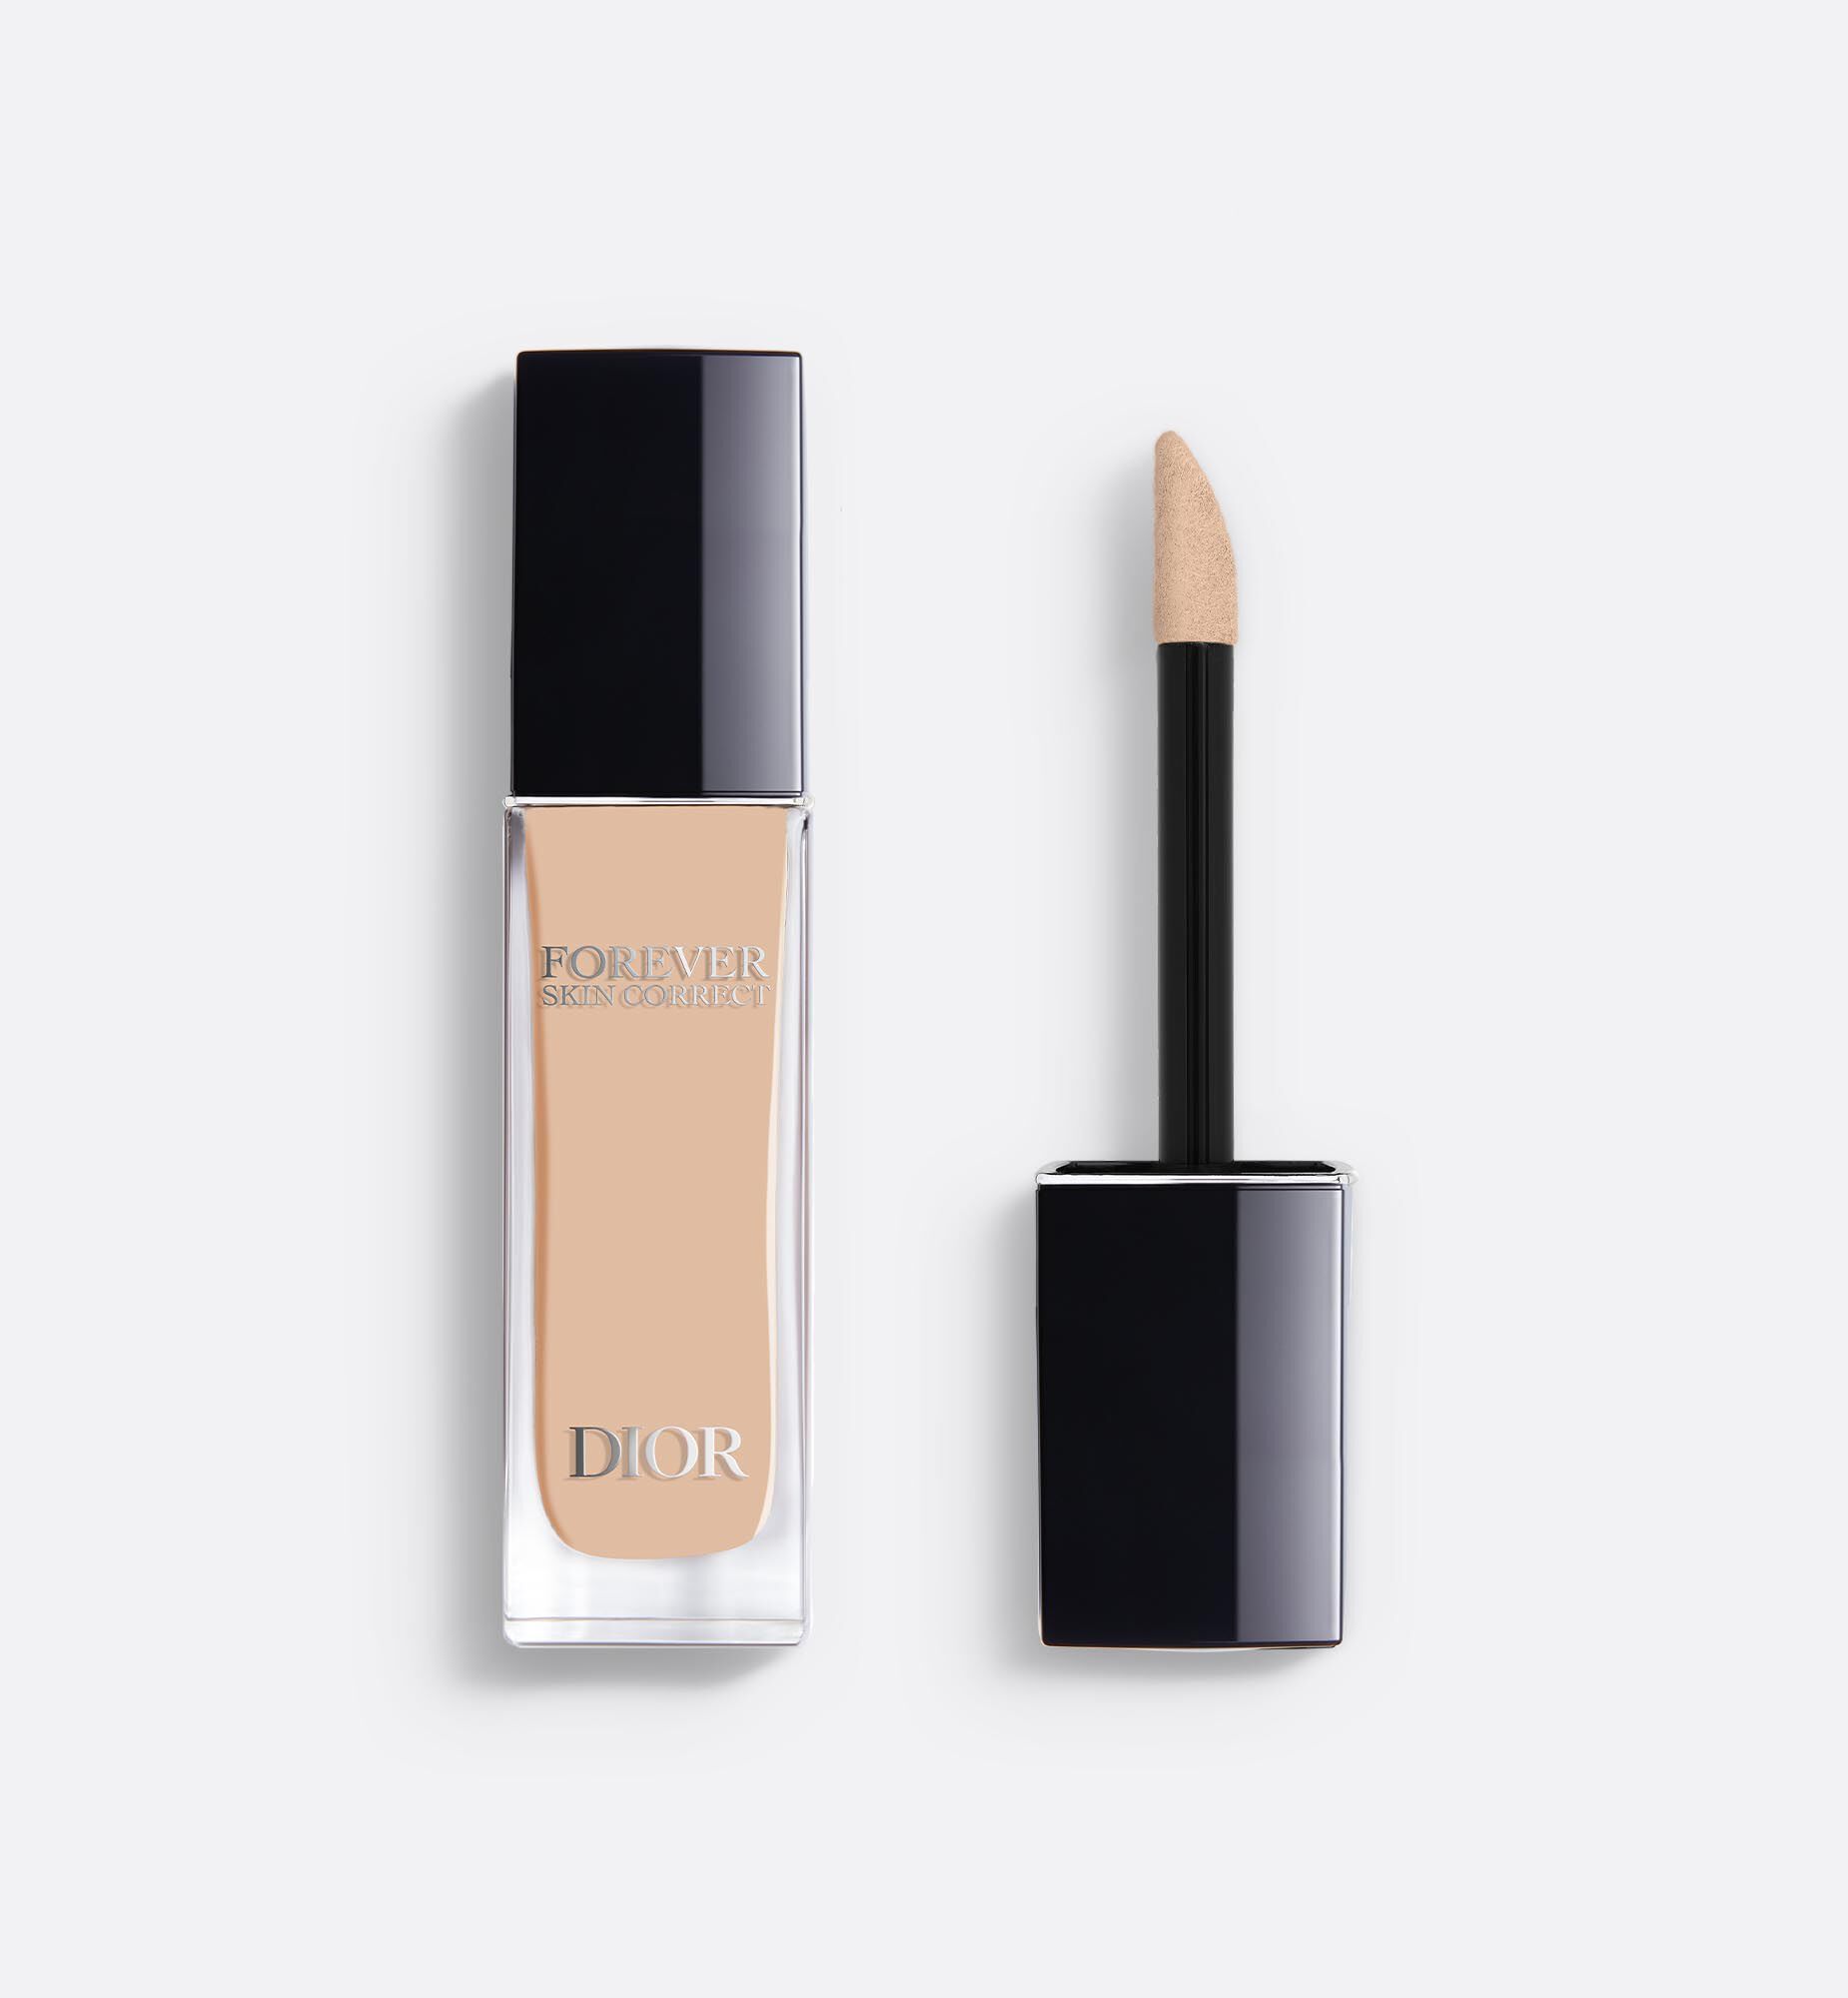 Dior Forever Skin Correct Creamy Concealer  CrystalCandy Makeup Blog   Review  Swatches